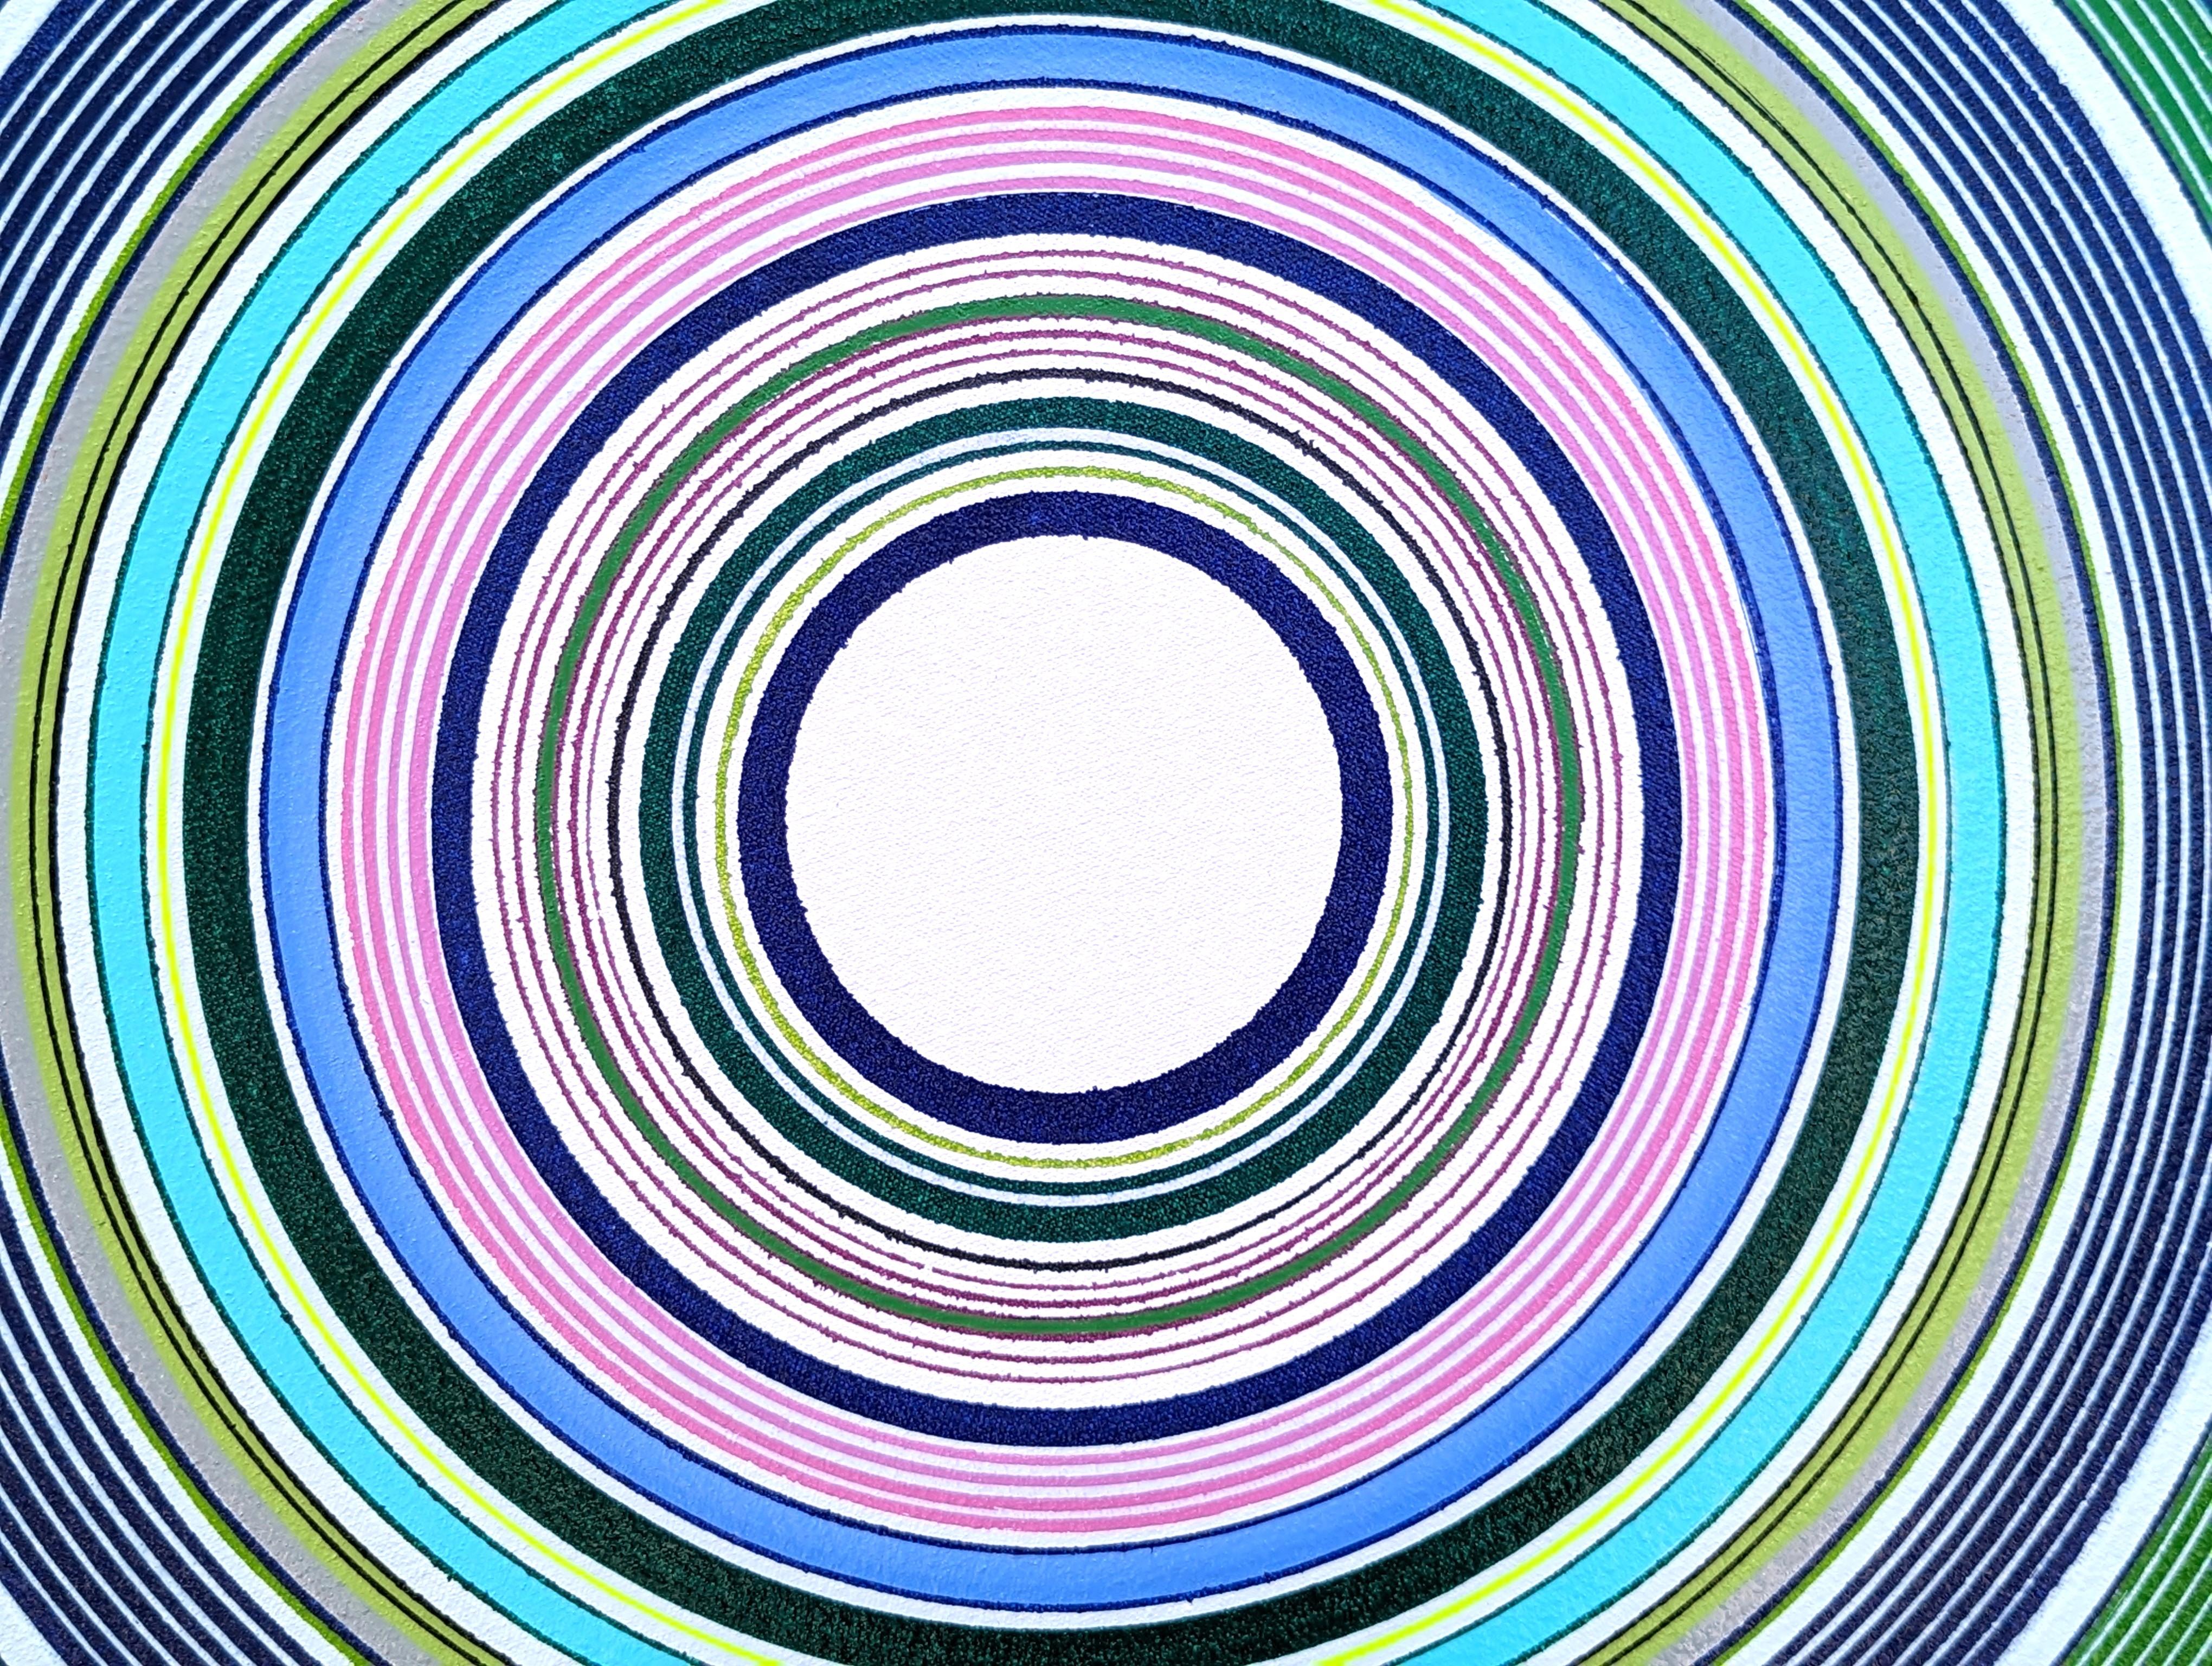 “Year of Love” Contemporary Blue, Green, and Navy Concentric Circle Painting 4